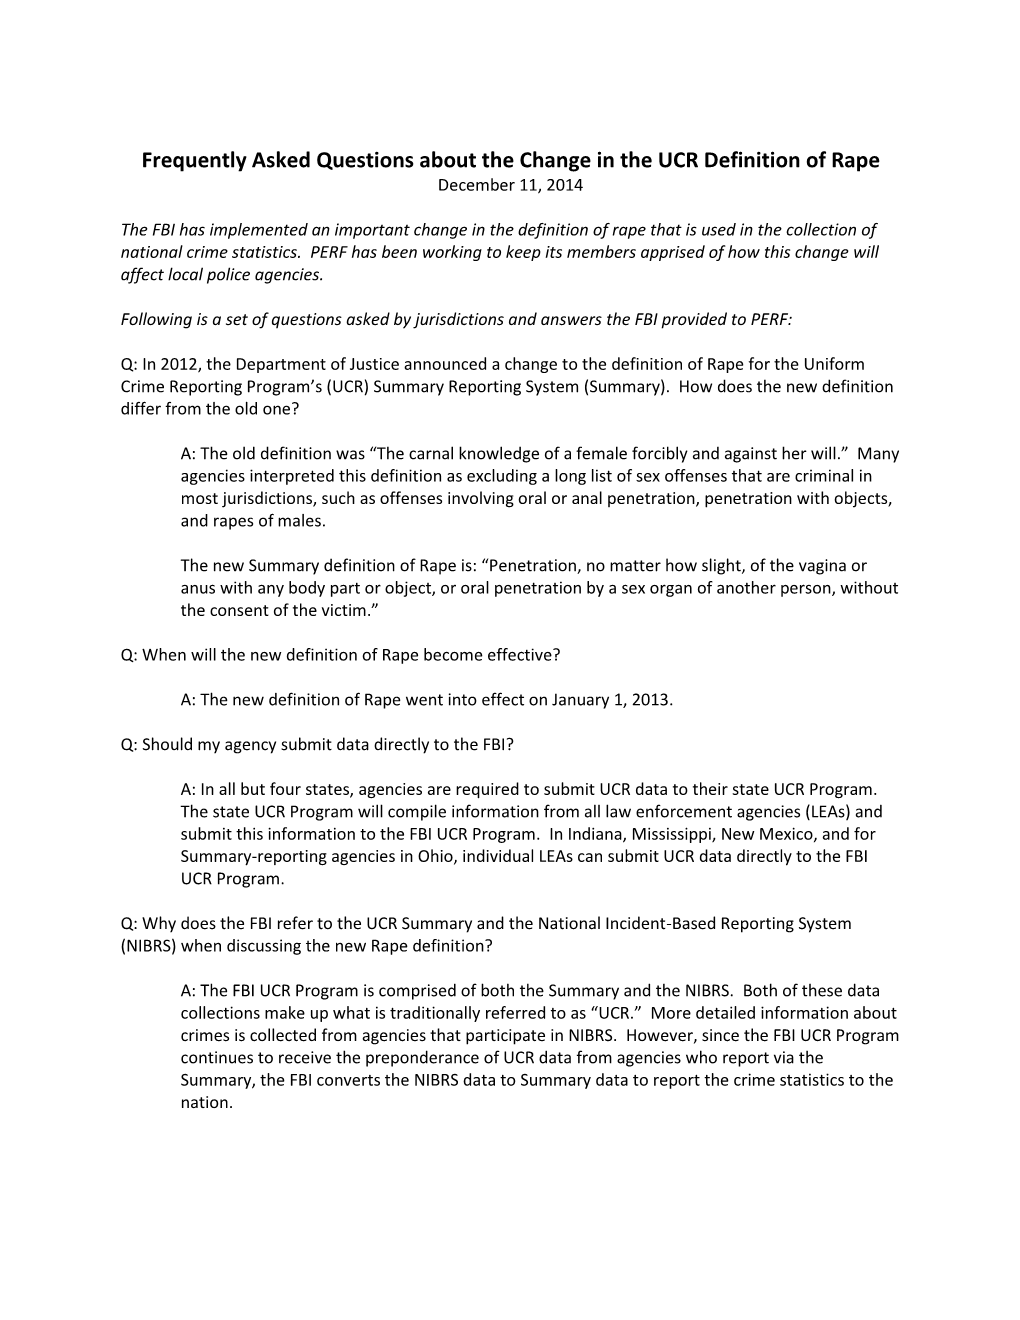 Frequently Asked Questions About the Change in the UCR Definition of Rape December 11, 2014